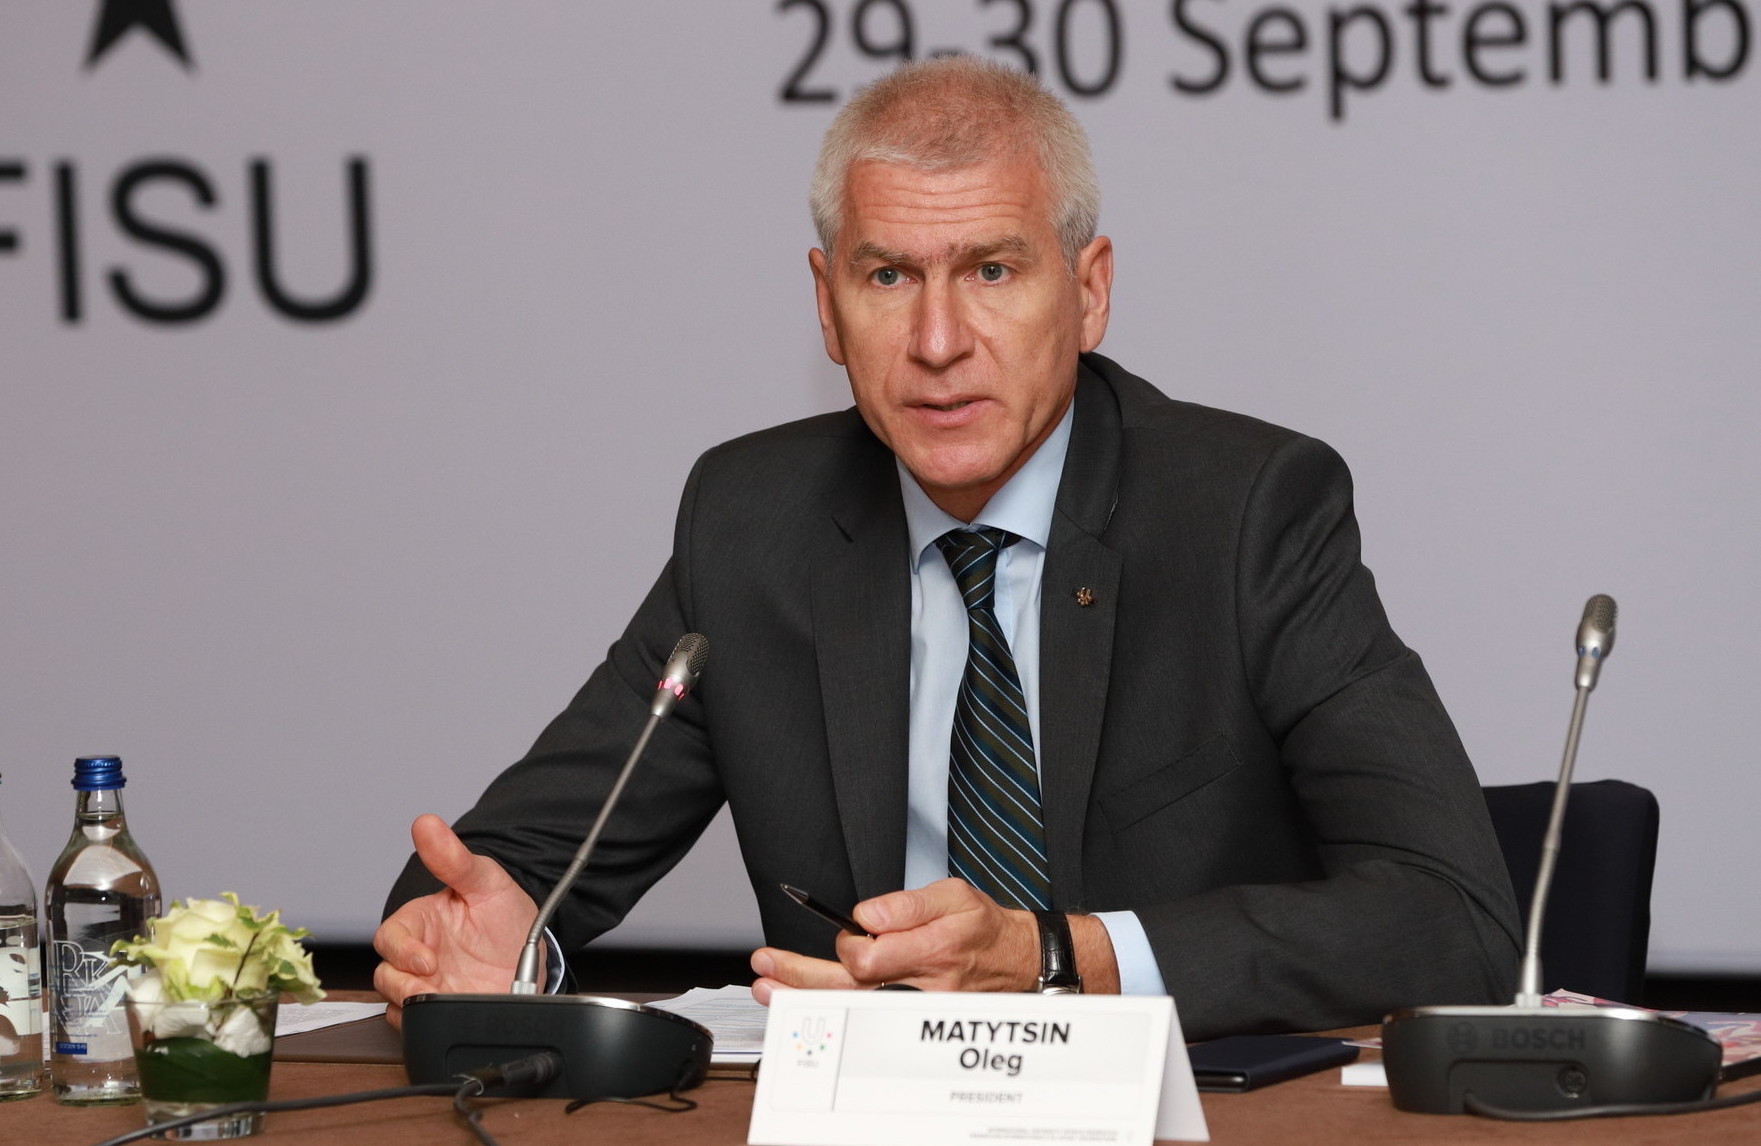 FISU President Oleg Matytsin said the Healthy Campus project, due to launch next month, could benefit students during the ongoing coronavirus pandemic ©FISU